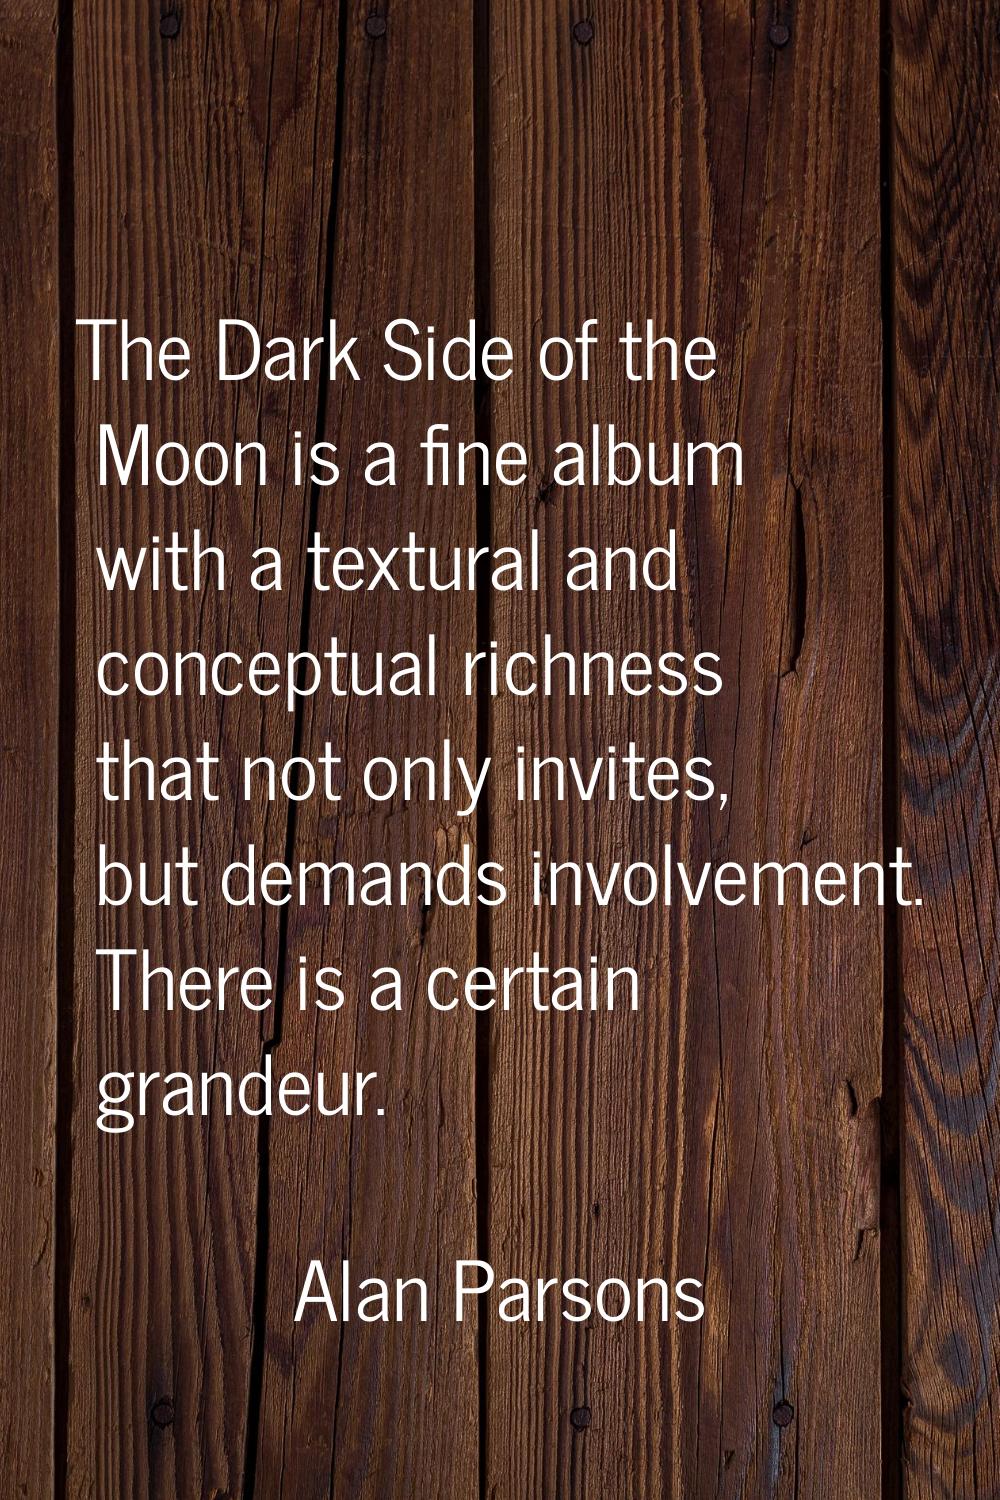 The Dark Side of the Moon is a fine album with a textural and conceptual richness that not only inv